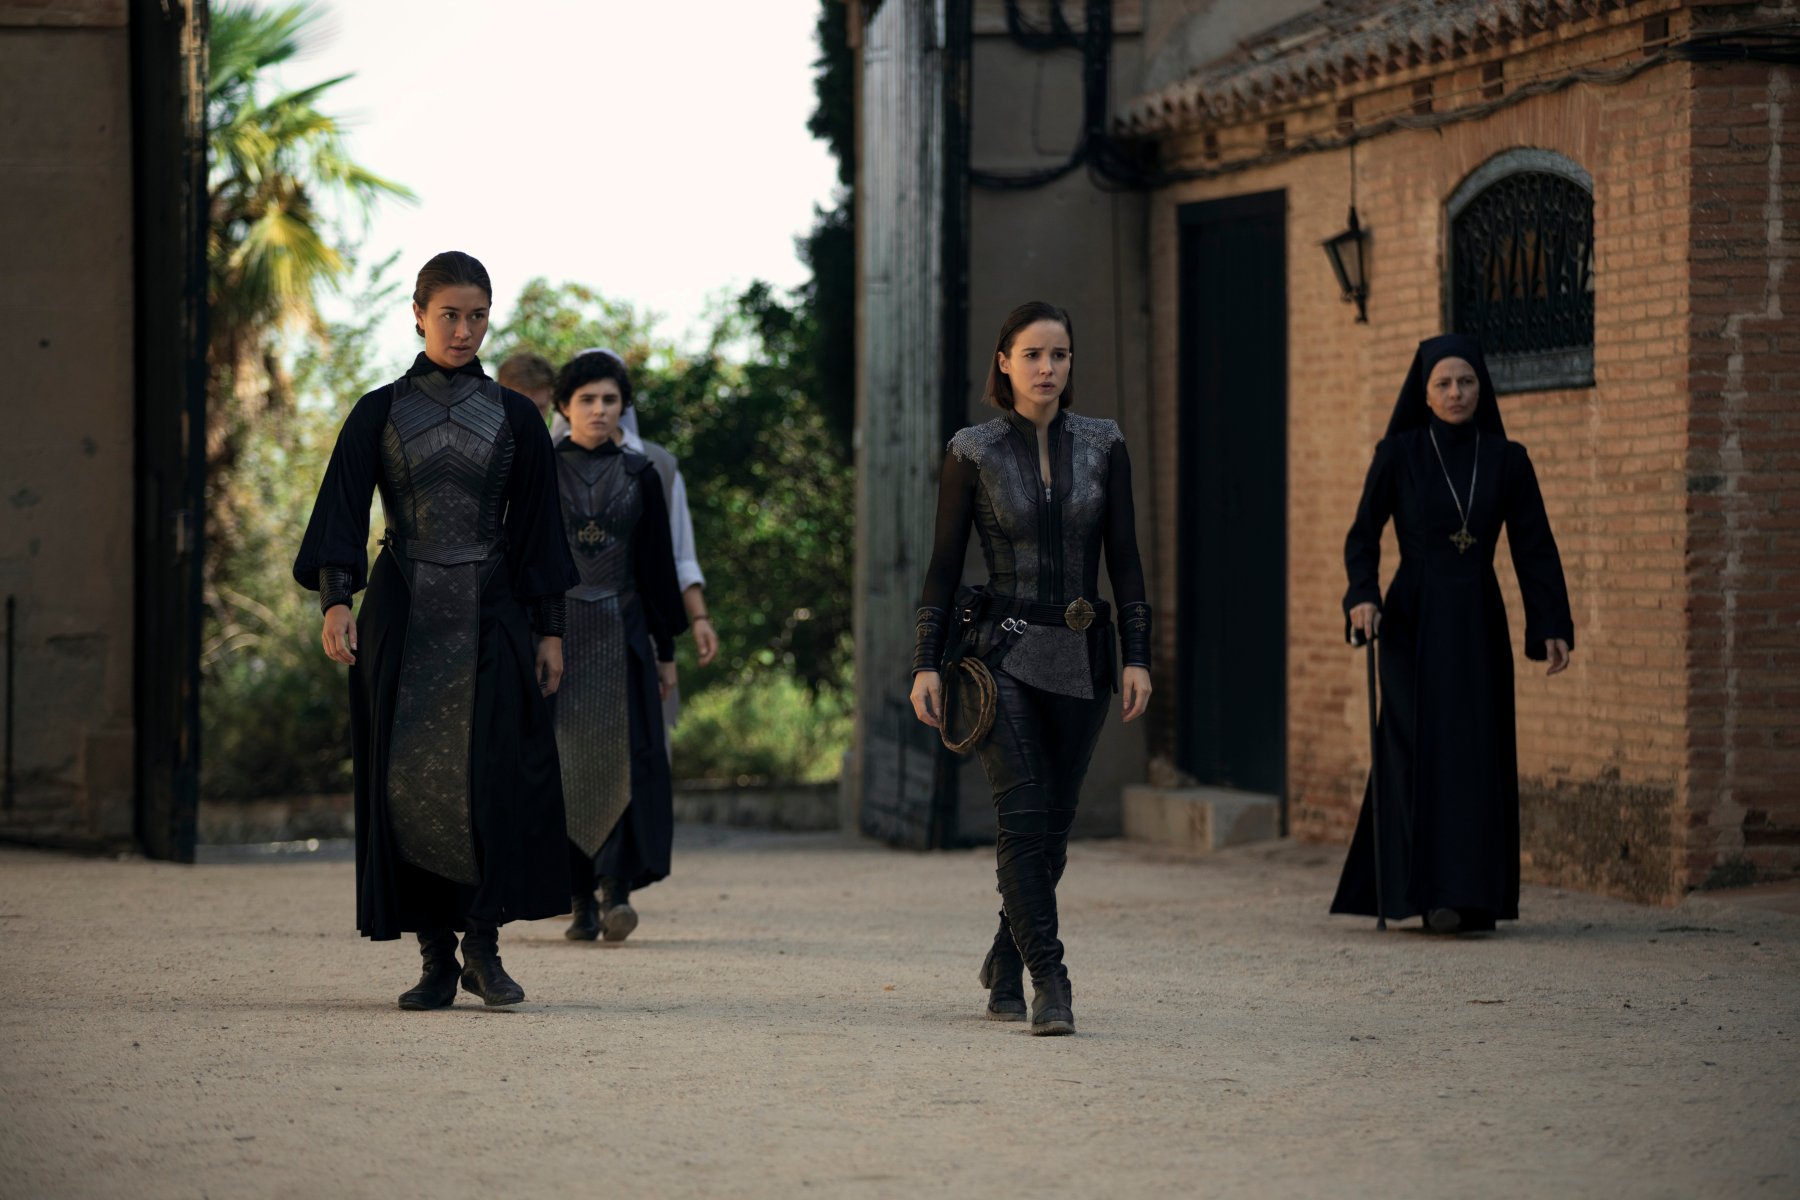 Kristina Tonteri-Young as Sister Beatrice, Olivia Delcán as Sister Camila, Alba Baptista as Ava Silva, Sylvia De Fanti as Mother Superion in 'Warrior Nun' for our article about season 3. They're all dressed in black and walking near one another.